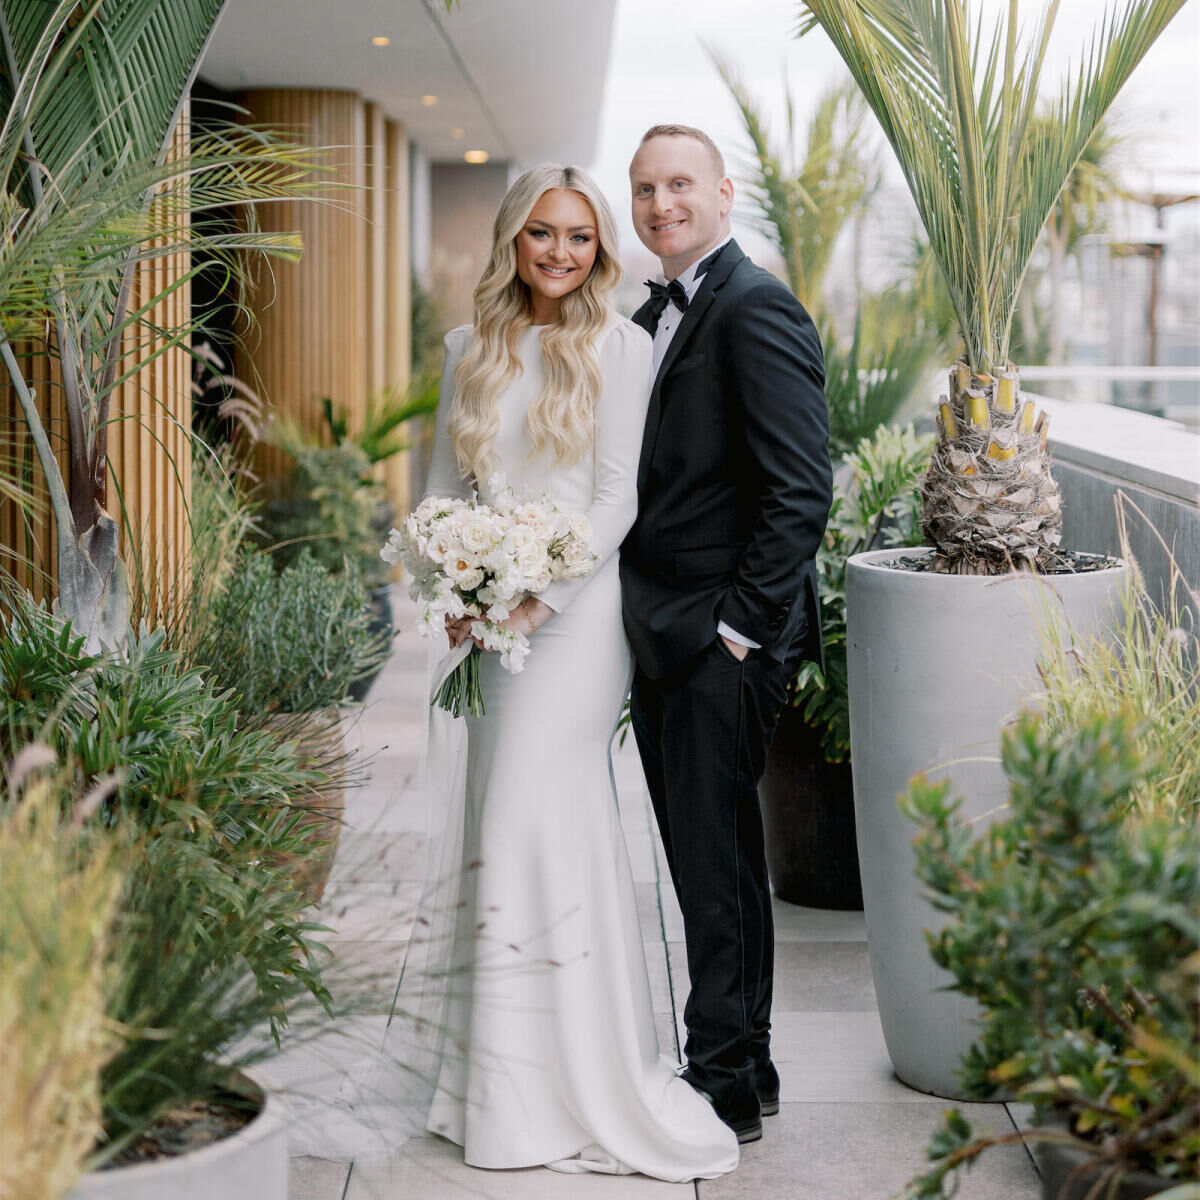 A bride and groom smile while having their portrait taken during their modern California wedding at the Santa Monica Proper hotel.